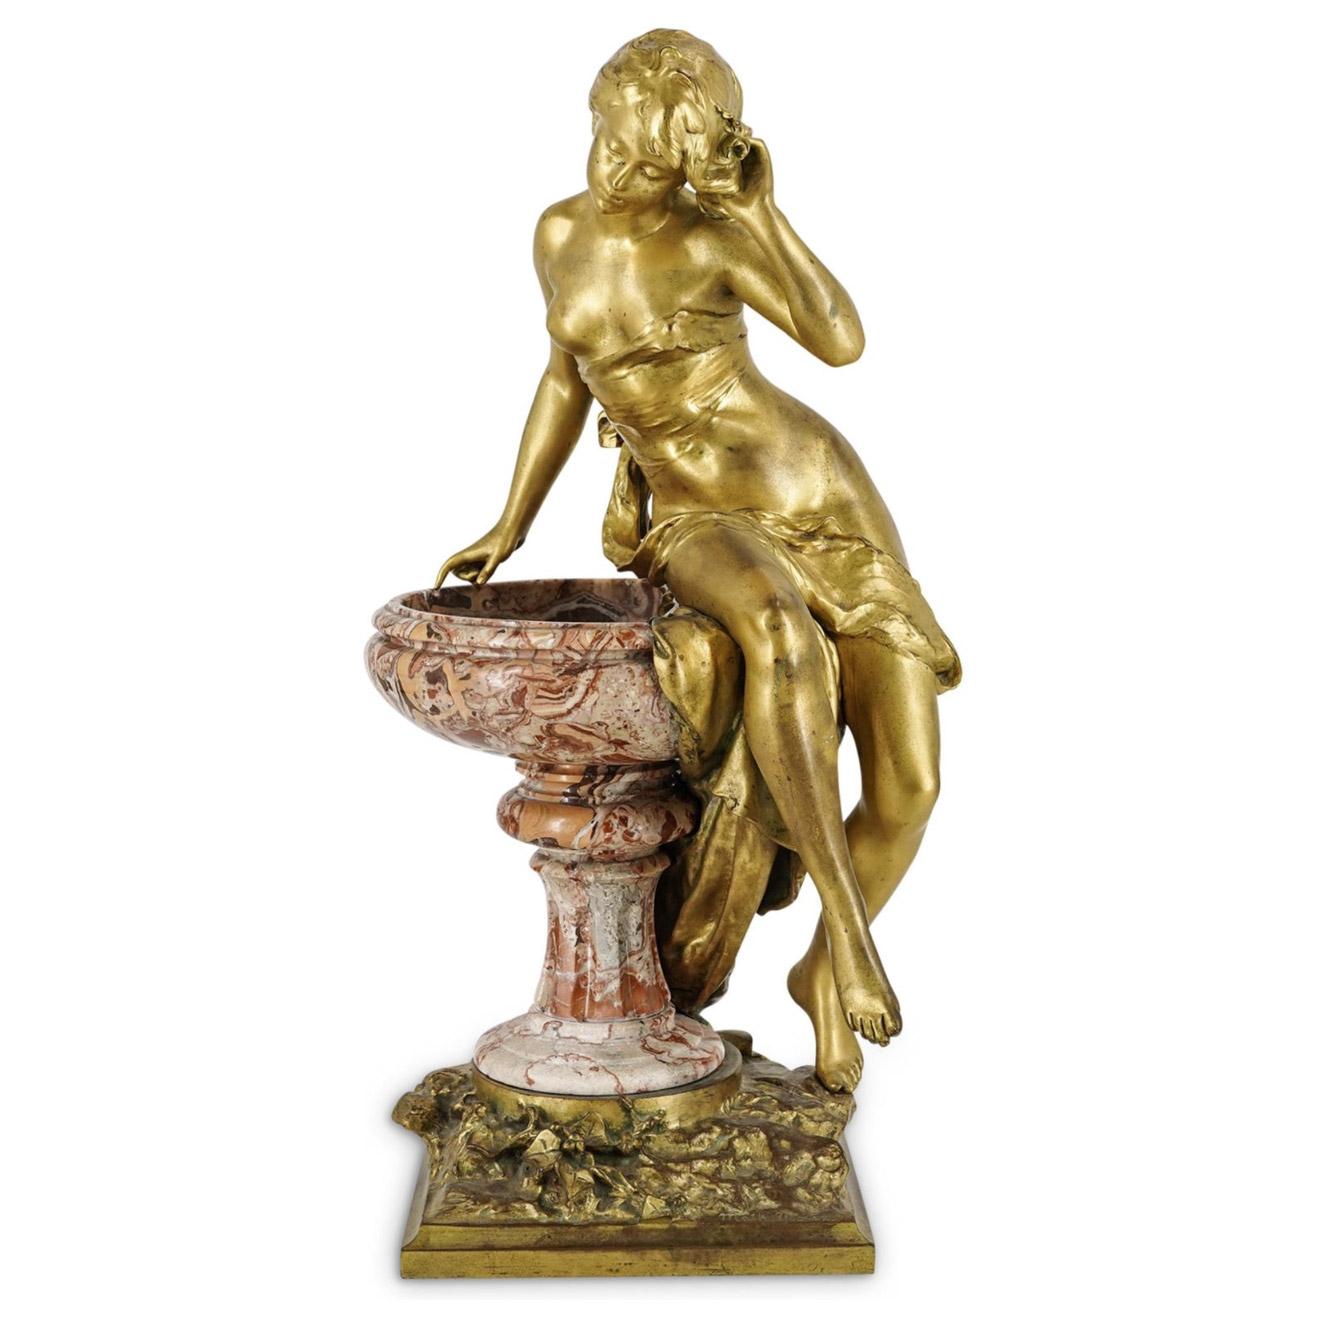 A gilt bronze Female figural sculpture depicting a young woman, slightly unveiled, sitting atop a variegated marble fountain, fitted atop a squared bronze base decorated with foliage. Signed "M. Moureau".

Artist: Mathurin Moreau (1822-1912)
Date: